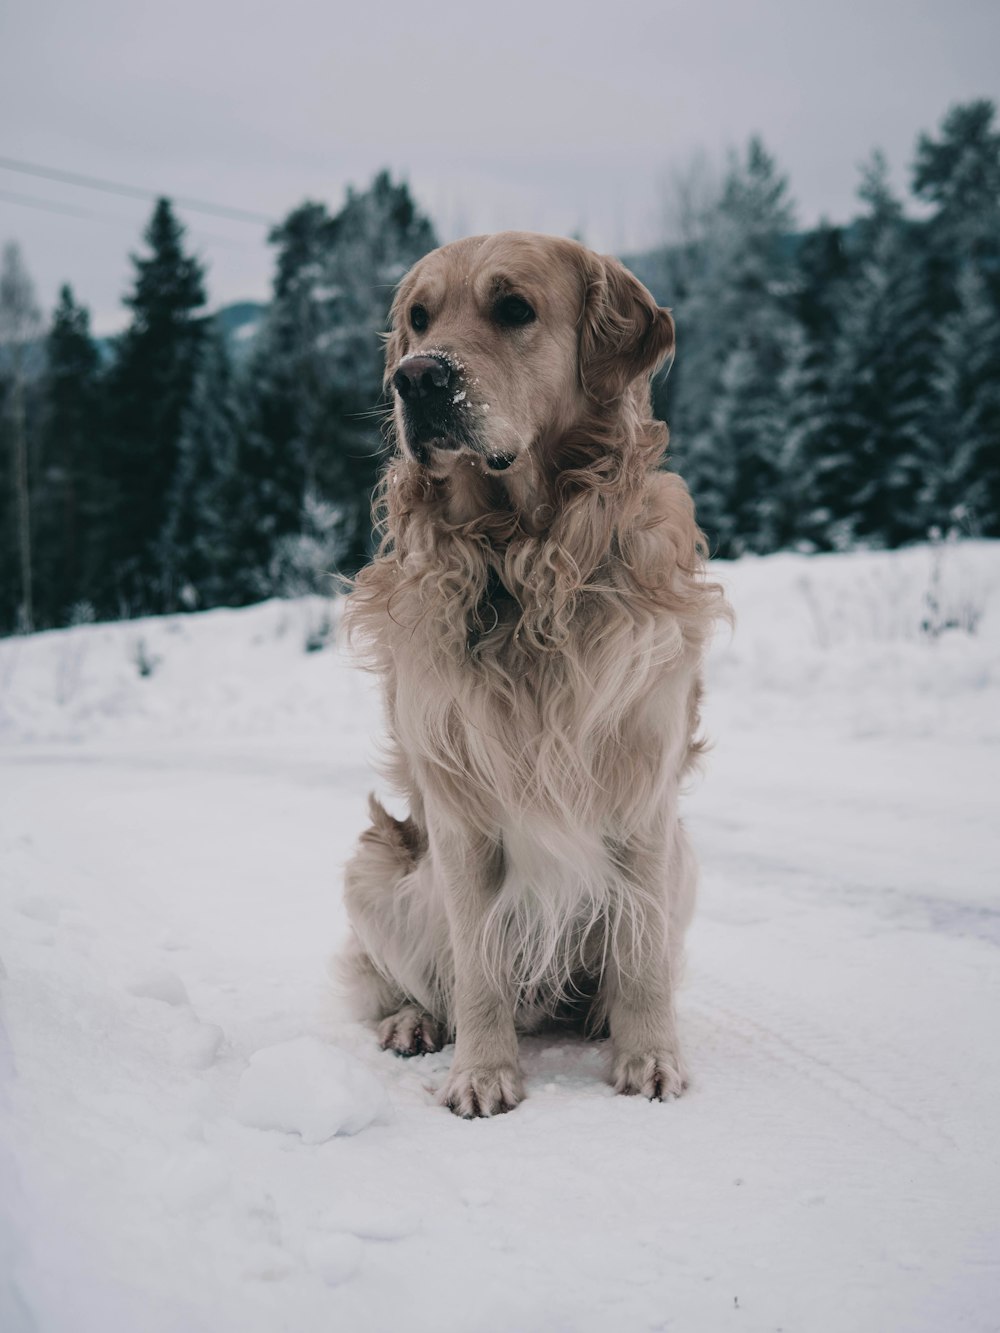 brown dog standing on snow near green trees